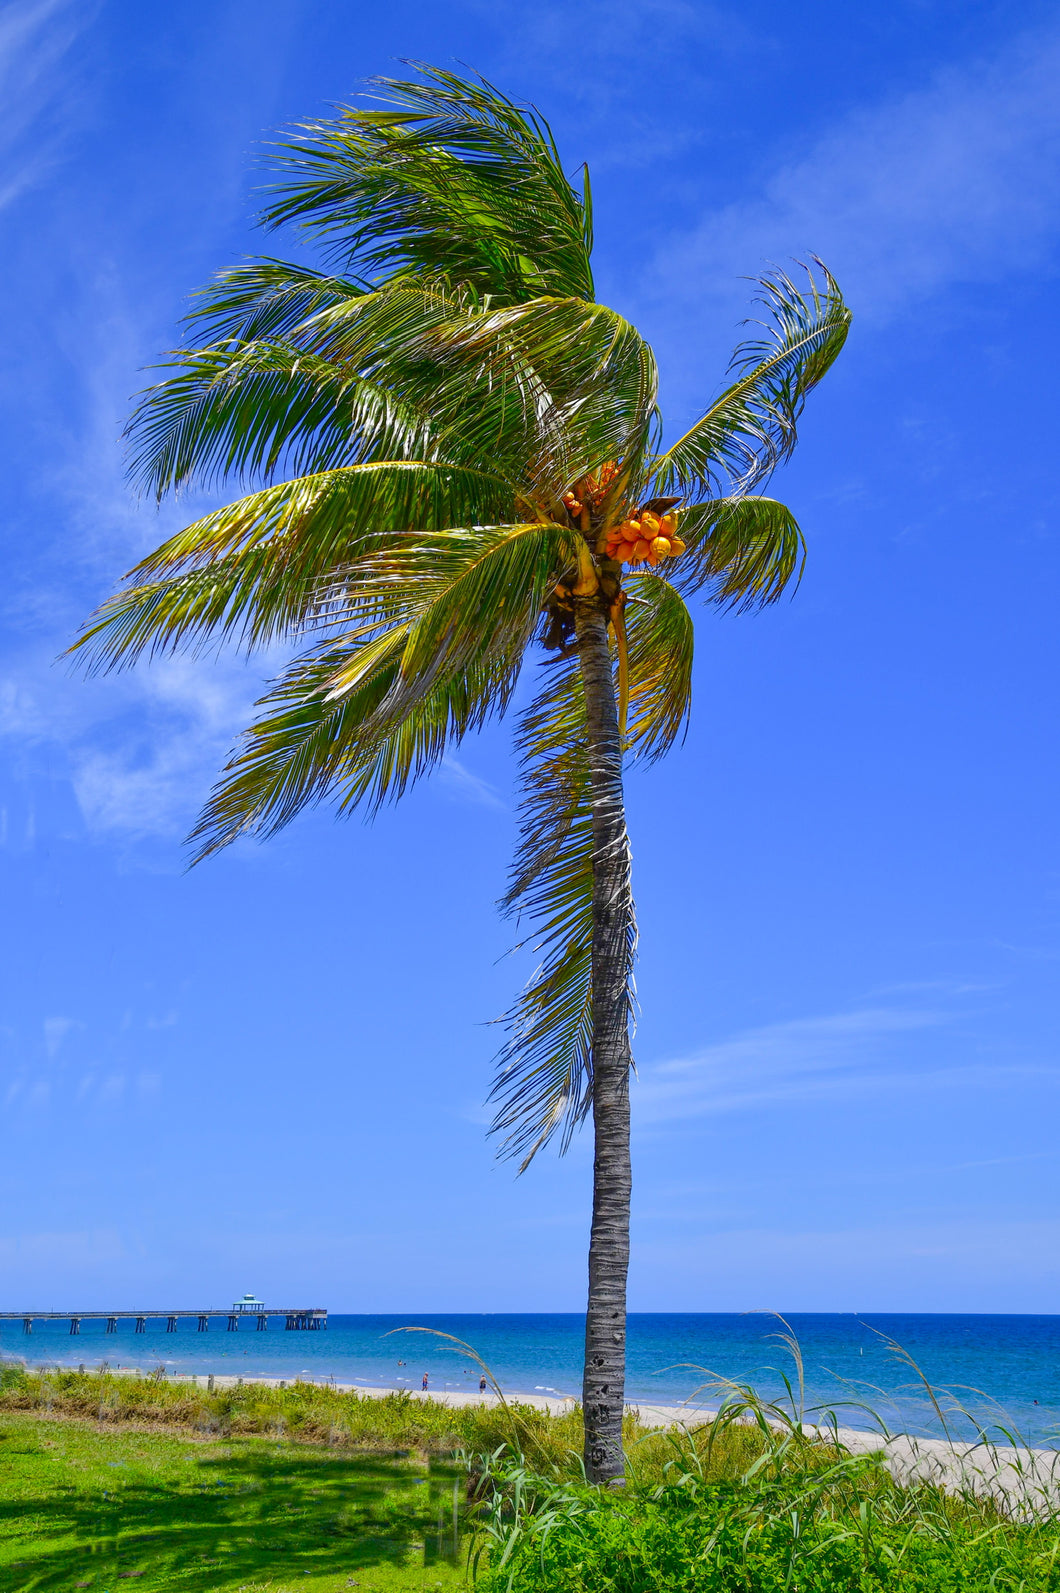 Coconut Palm by the Sea